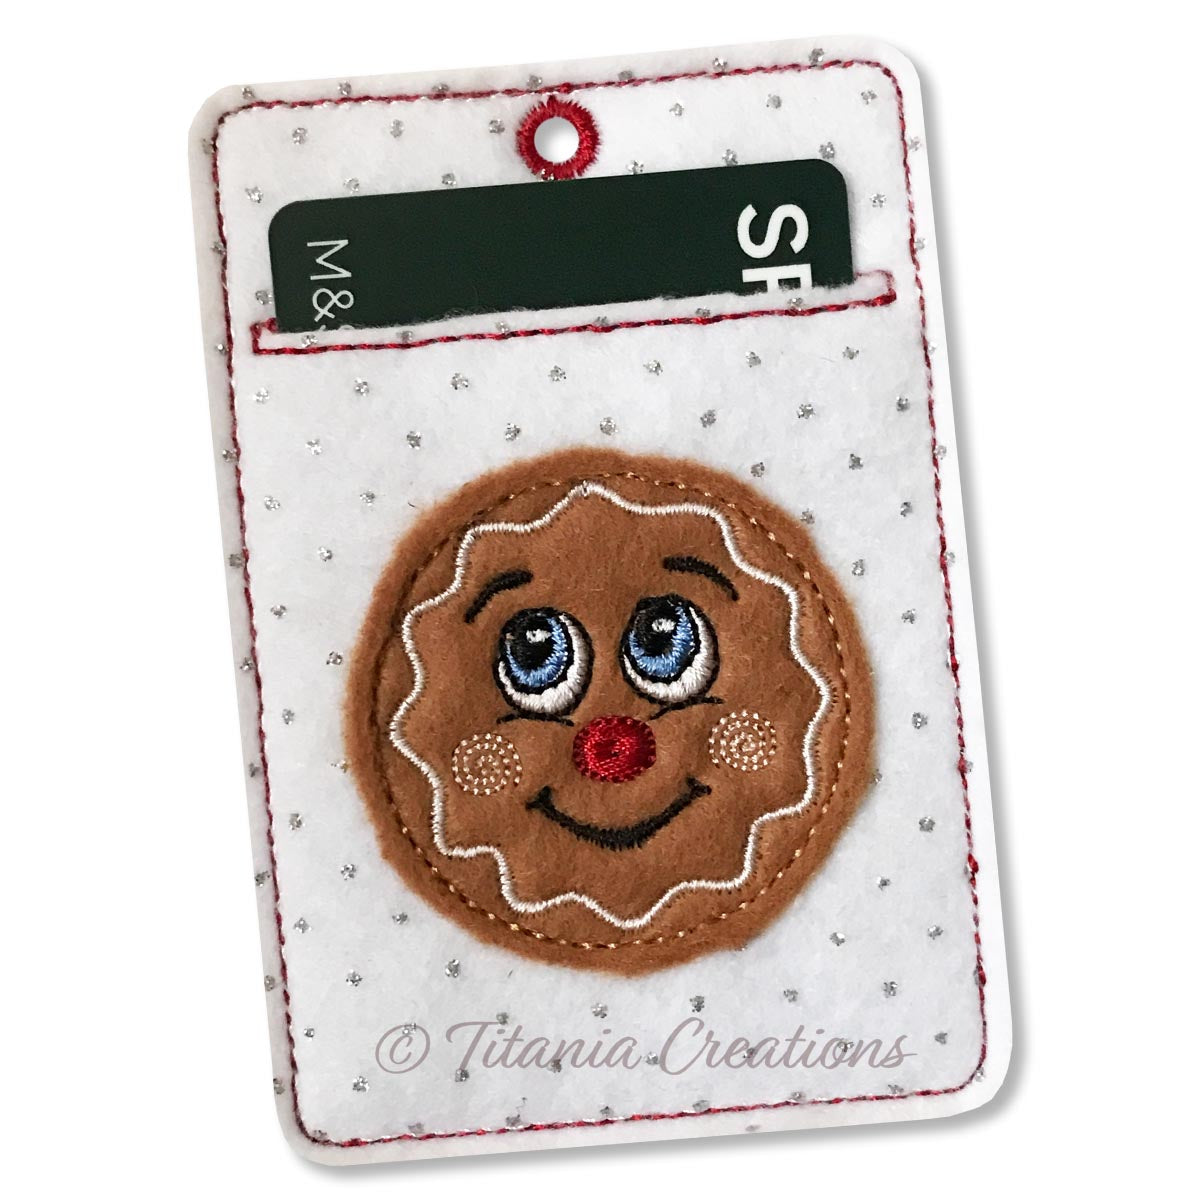 ITH Ginger Gift Card Holder 4x4